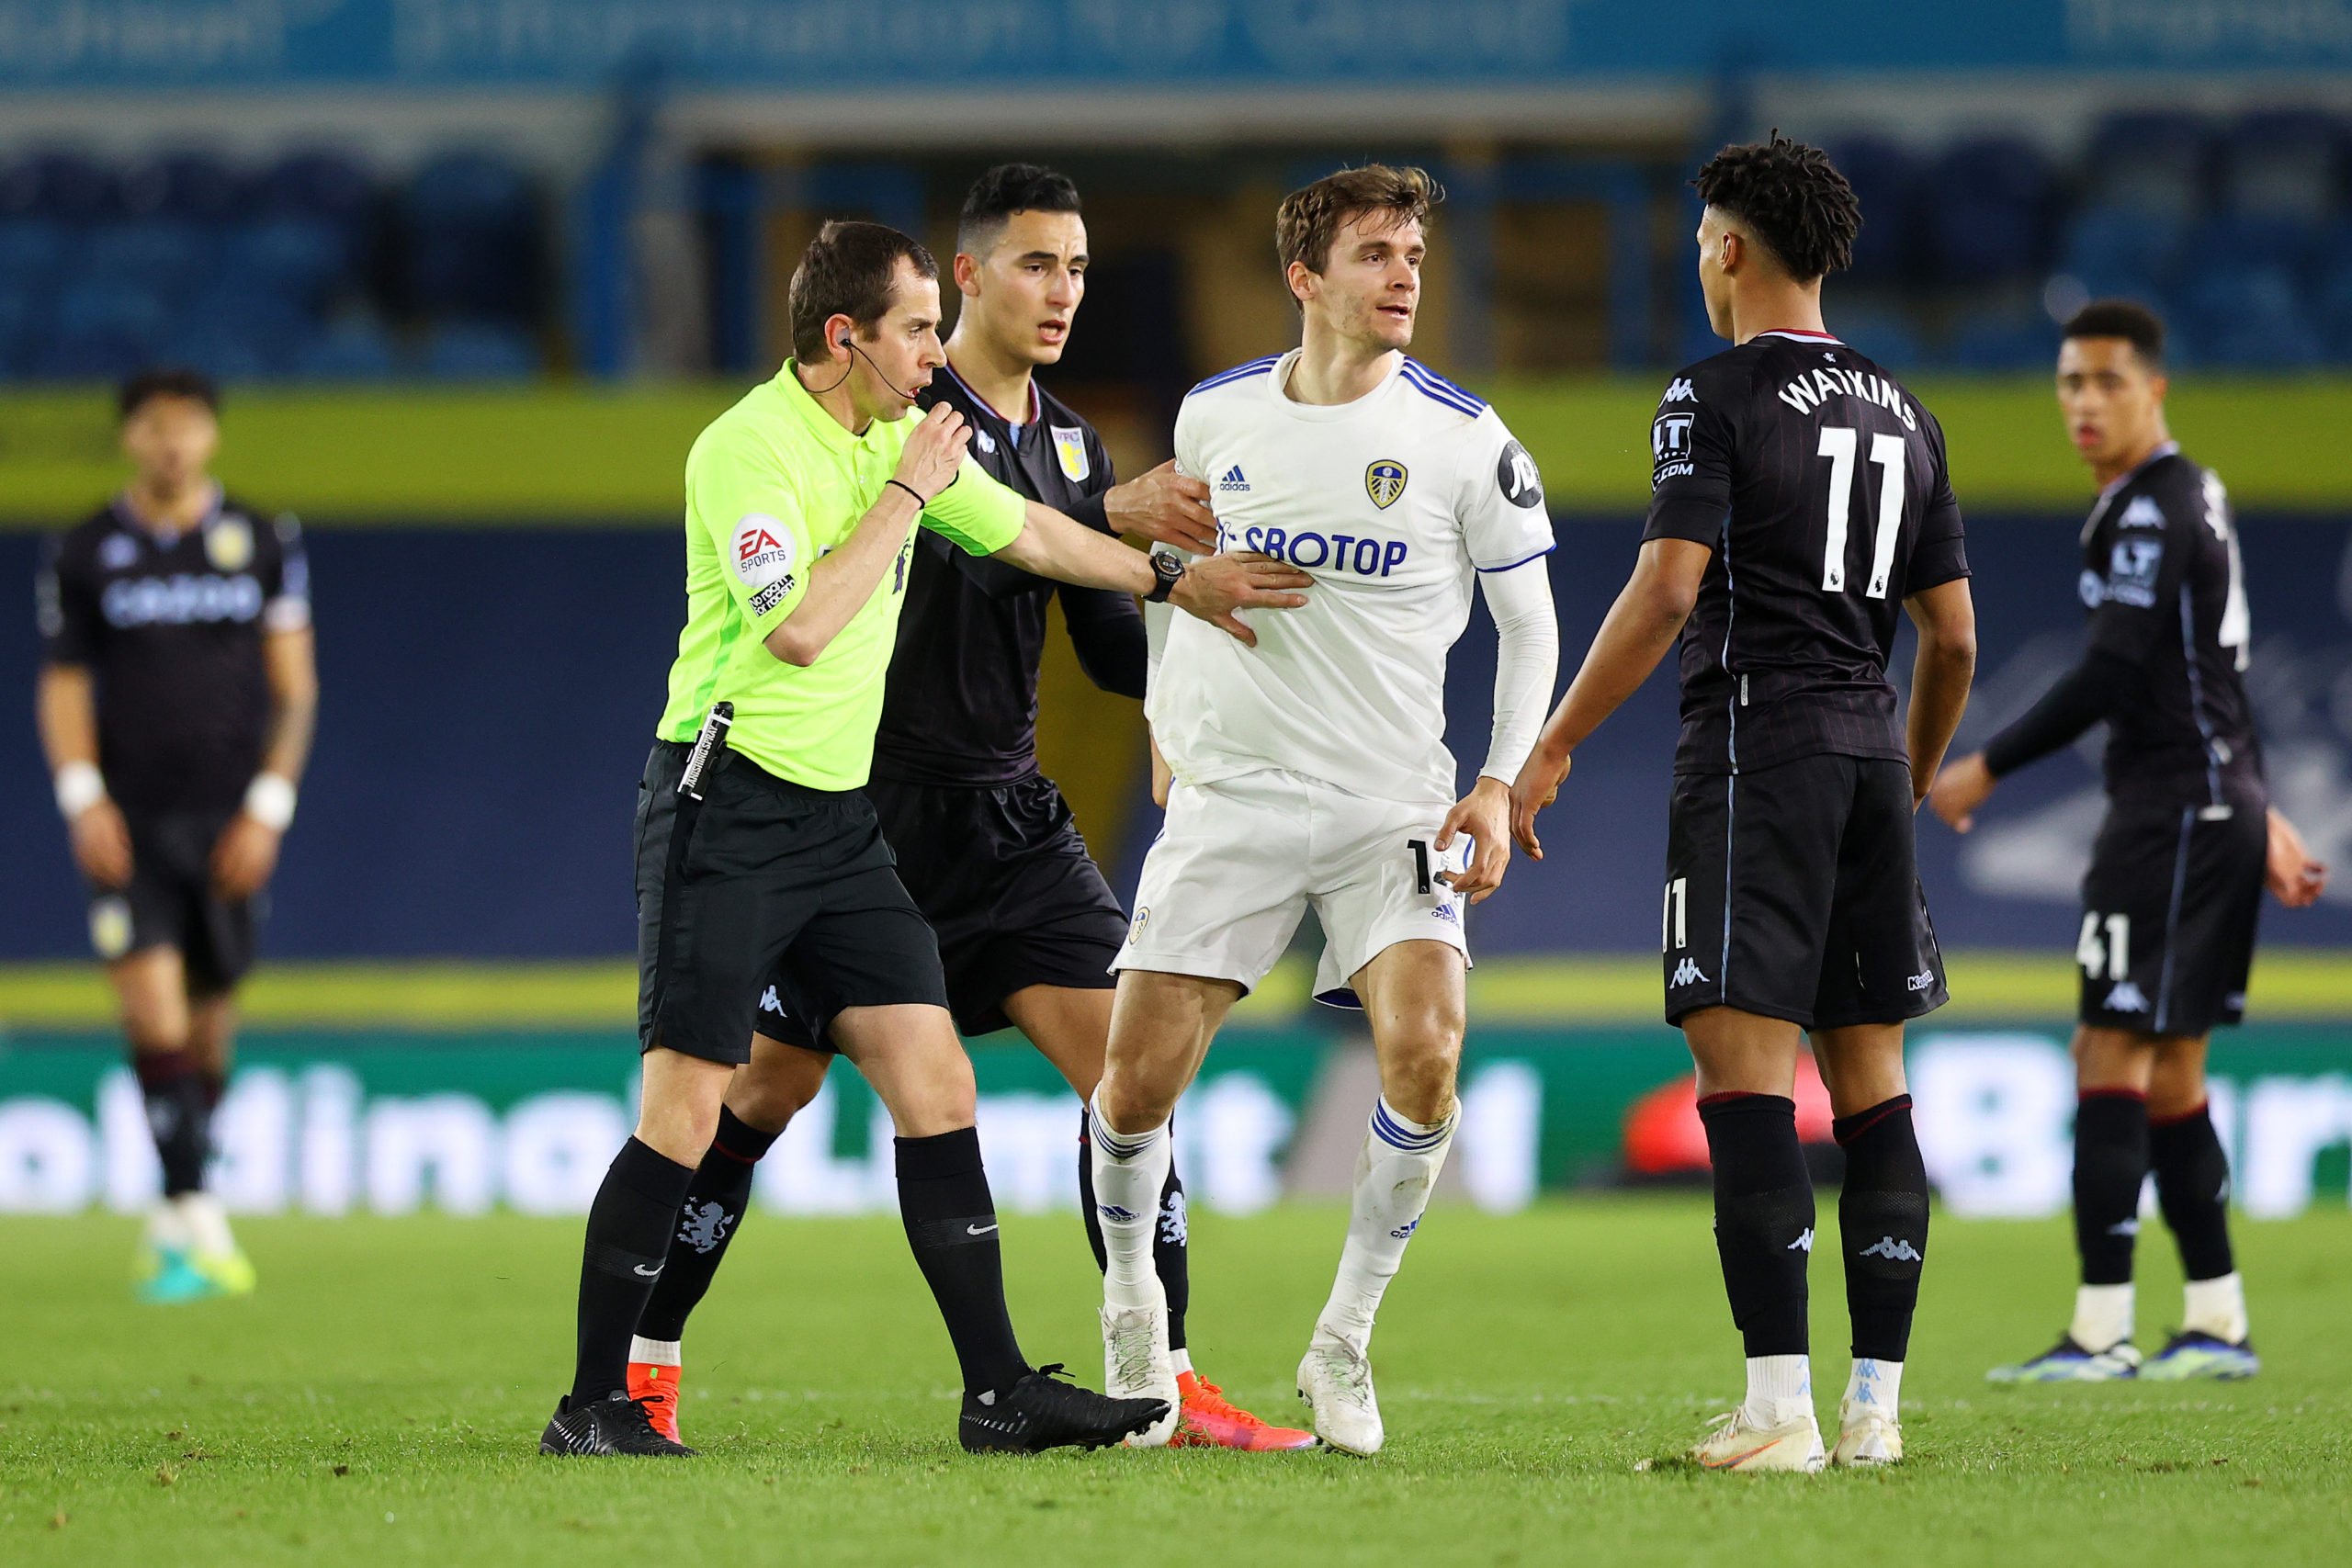 Leeds United Players Rated In Loss Vs Aston Villa (Diego Llorente can be seen in the picture)